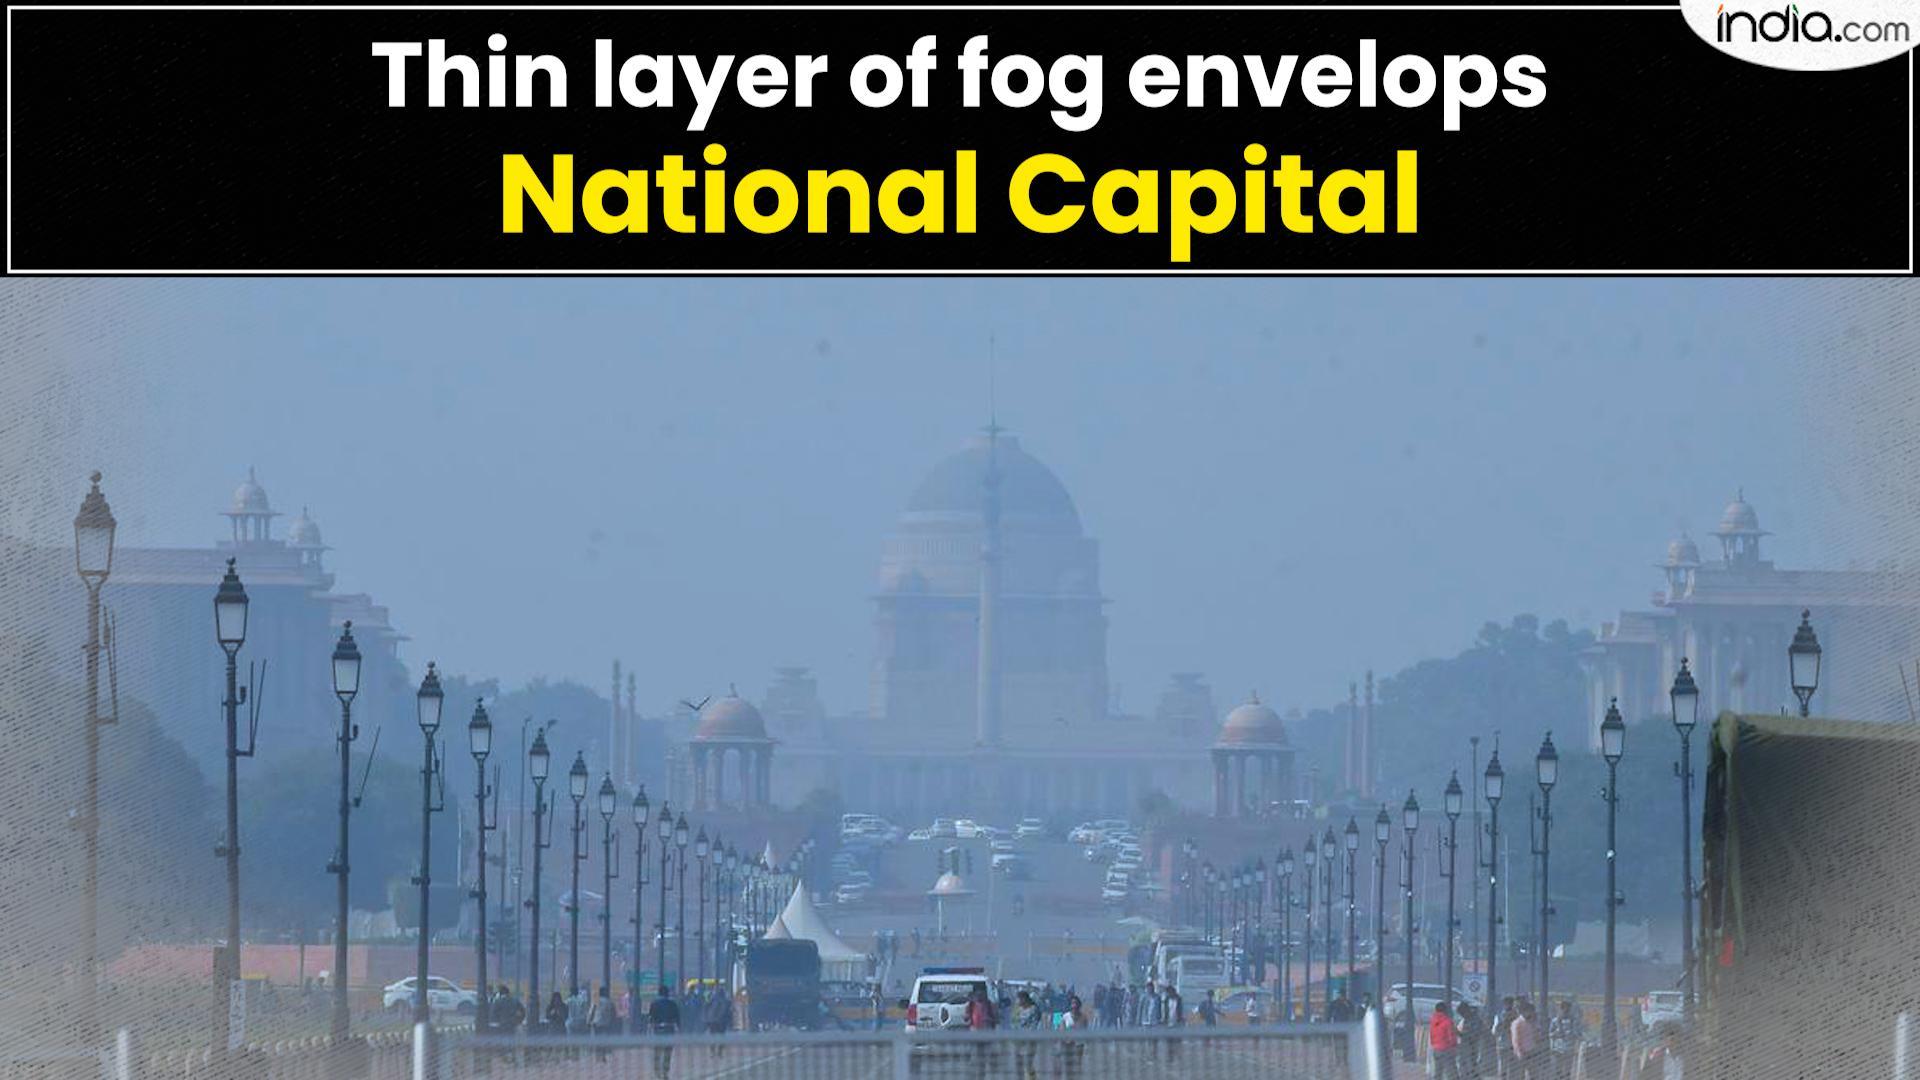 Weather Update: Thin layer of fog envelops National Capital